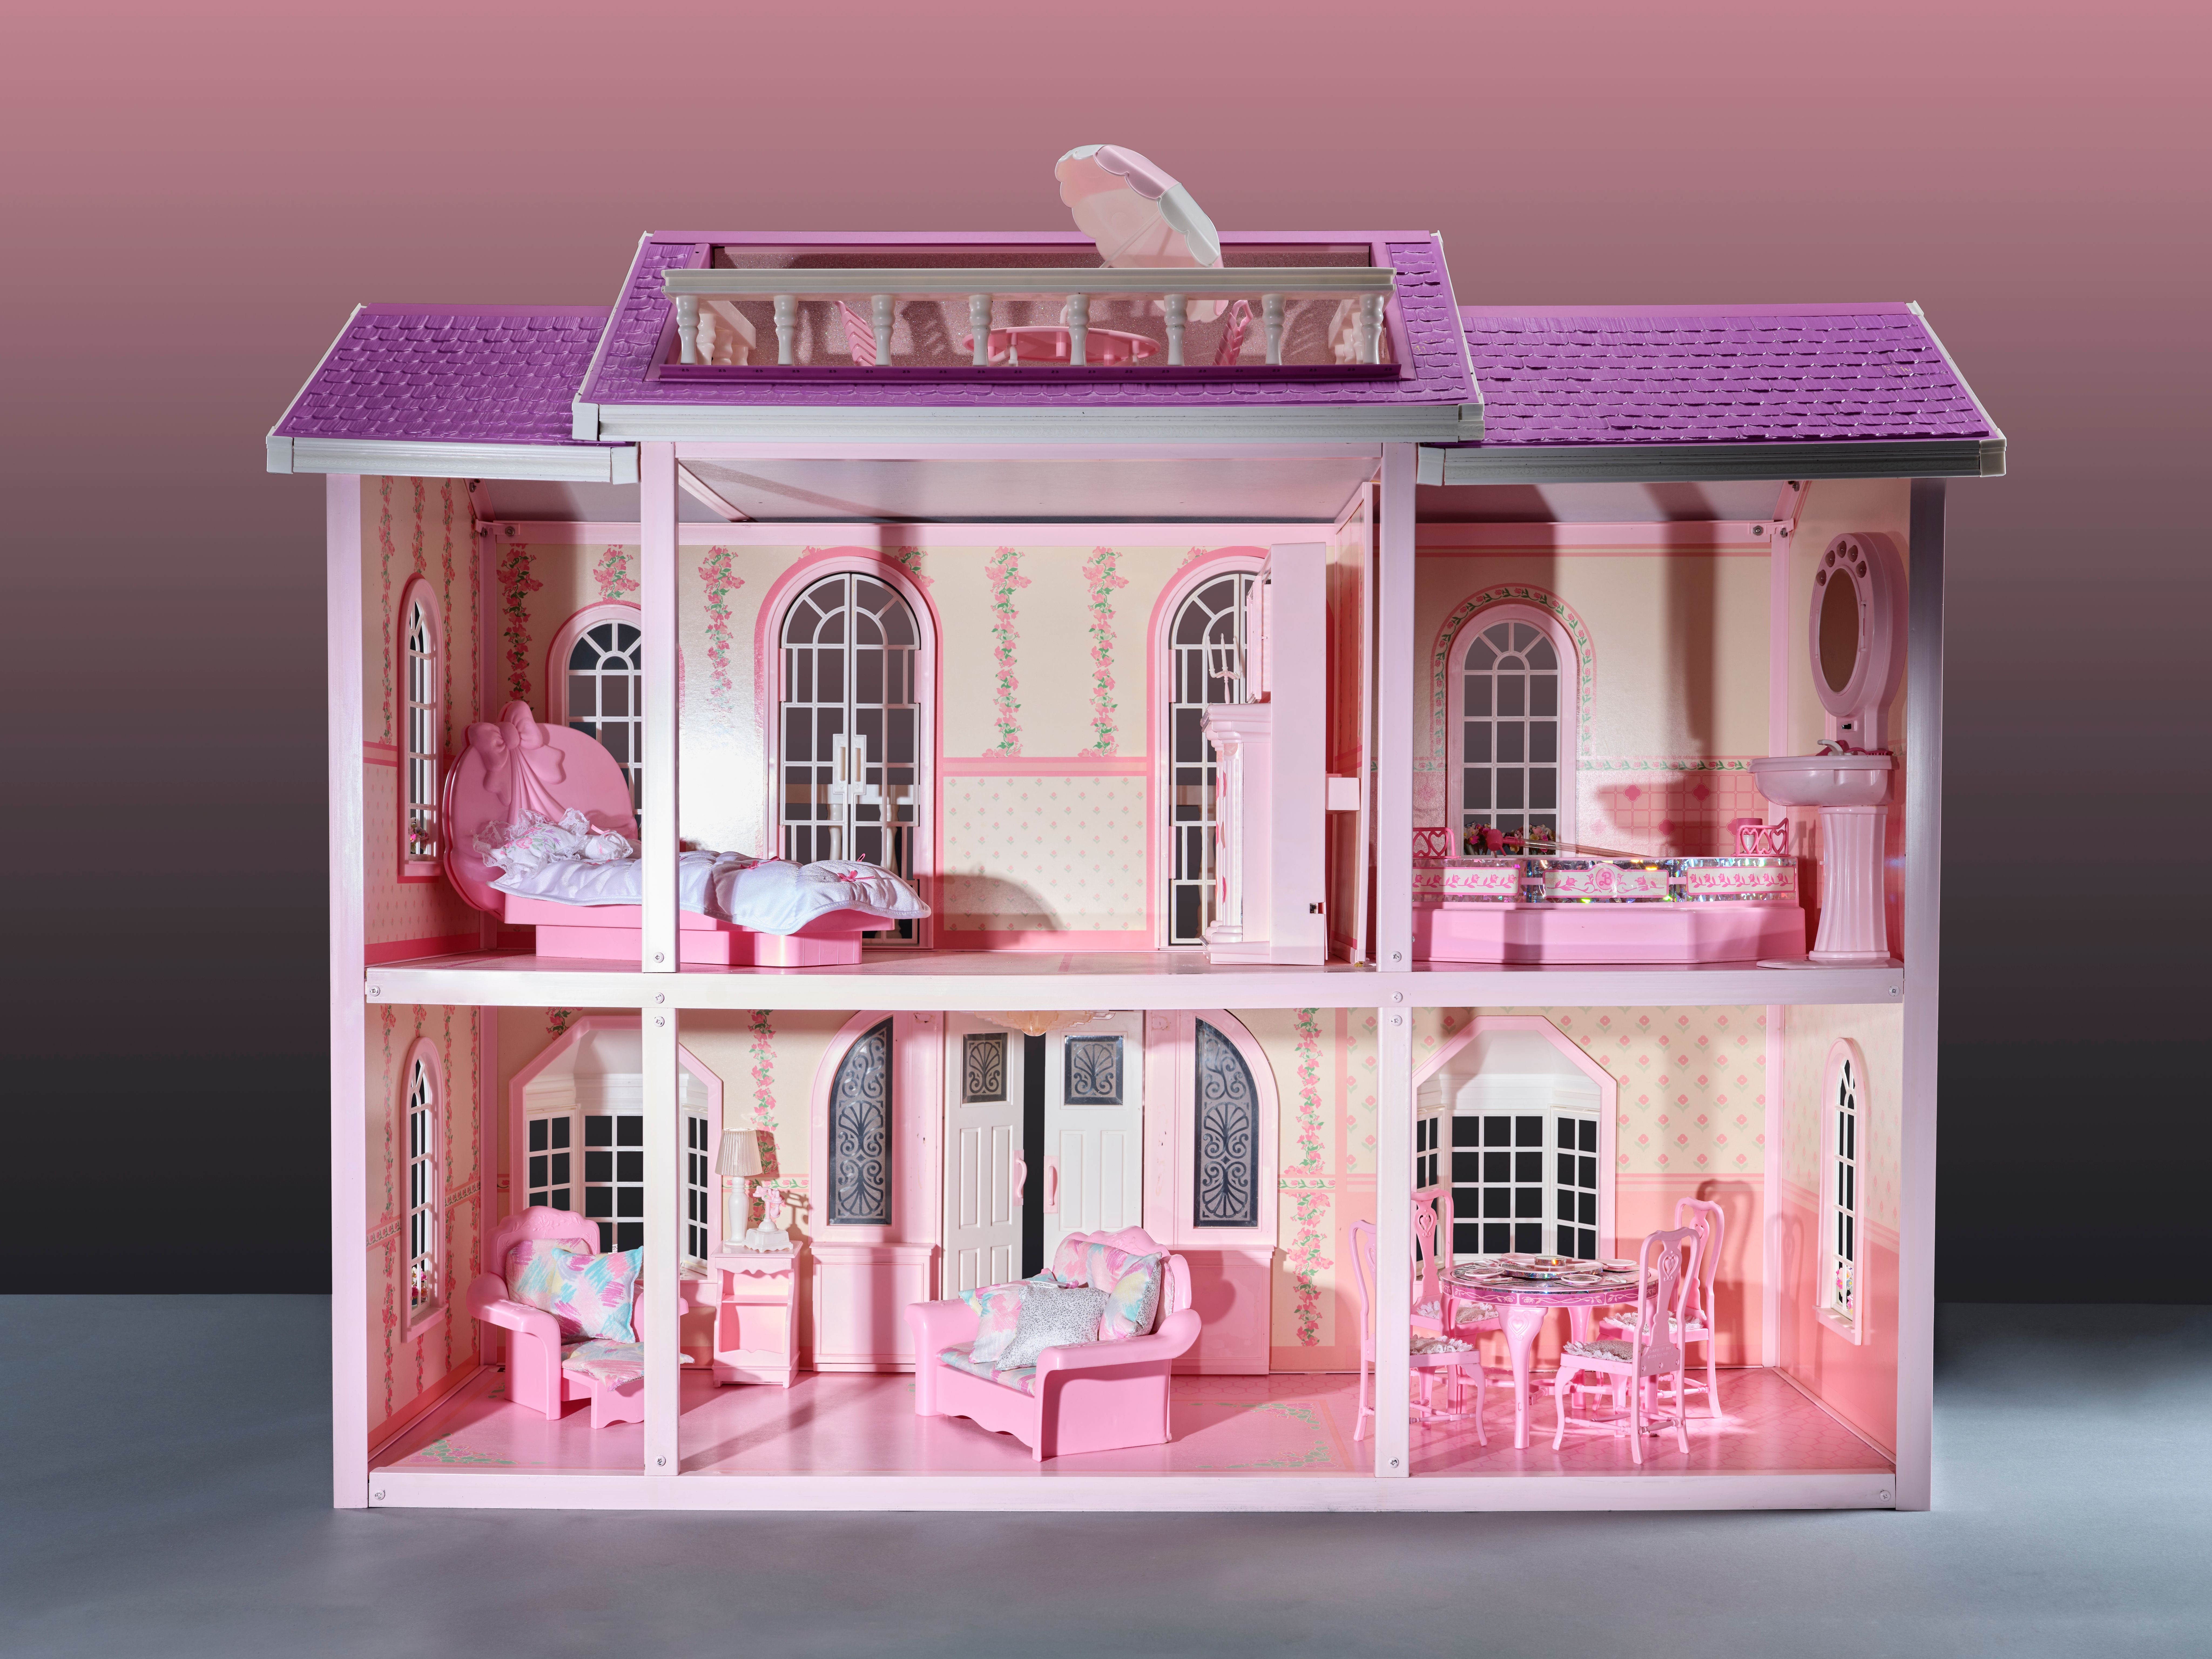 PIN–UP | THE BARBIE DREAMHOUSE